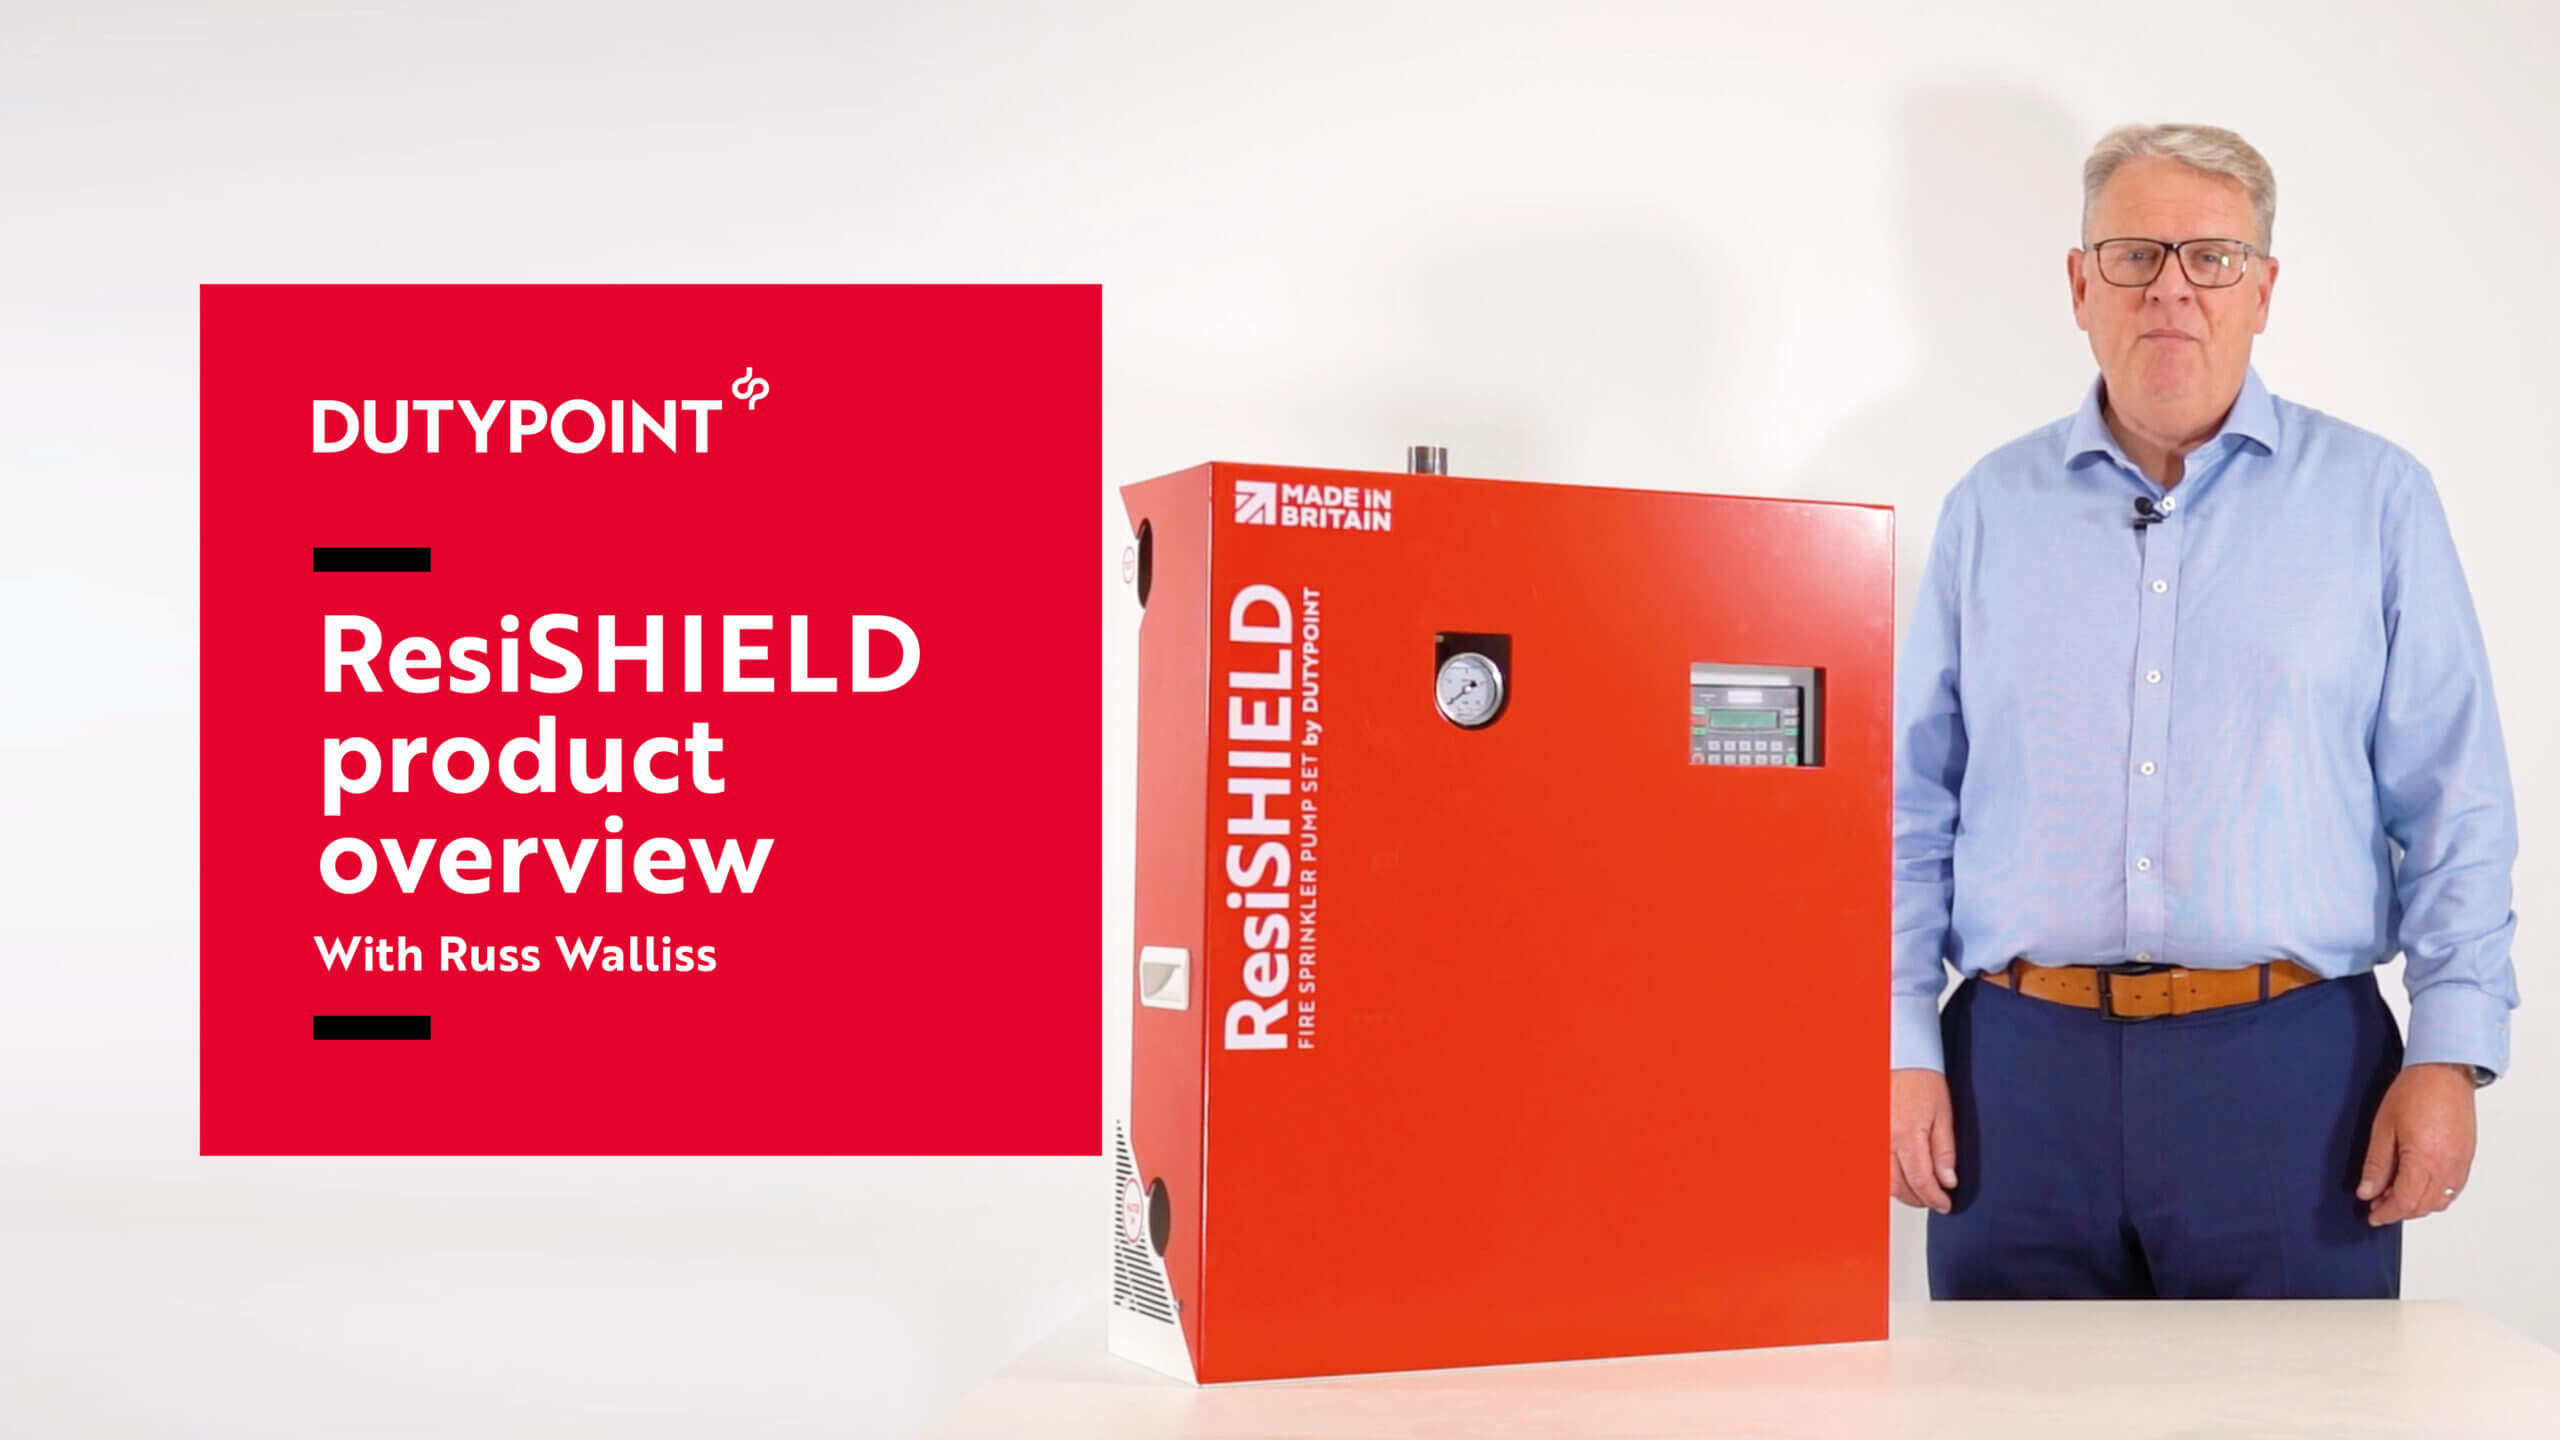 Russ Walliss explains the key features of ResiSHIELD